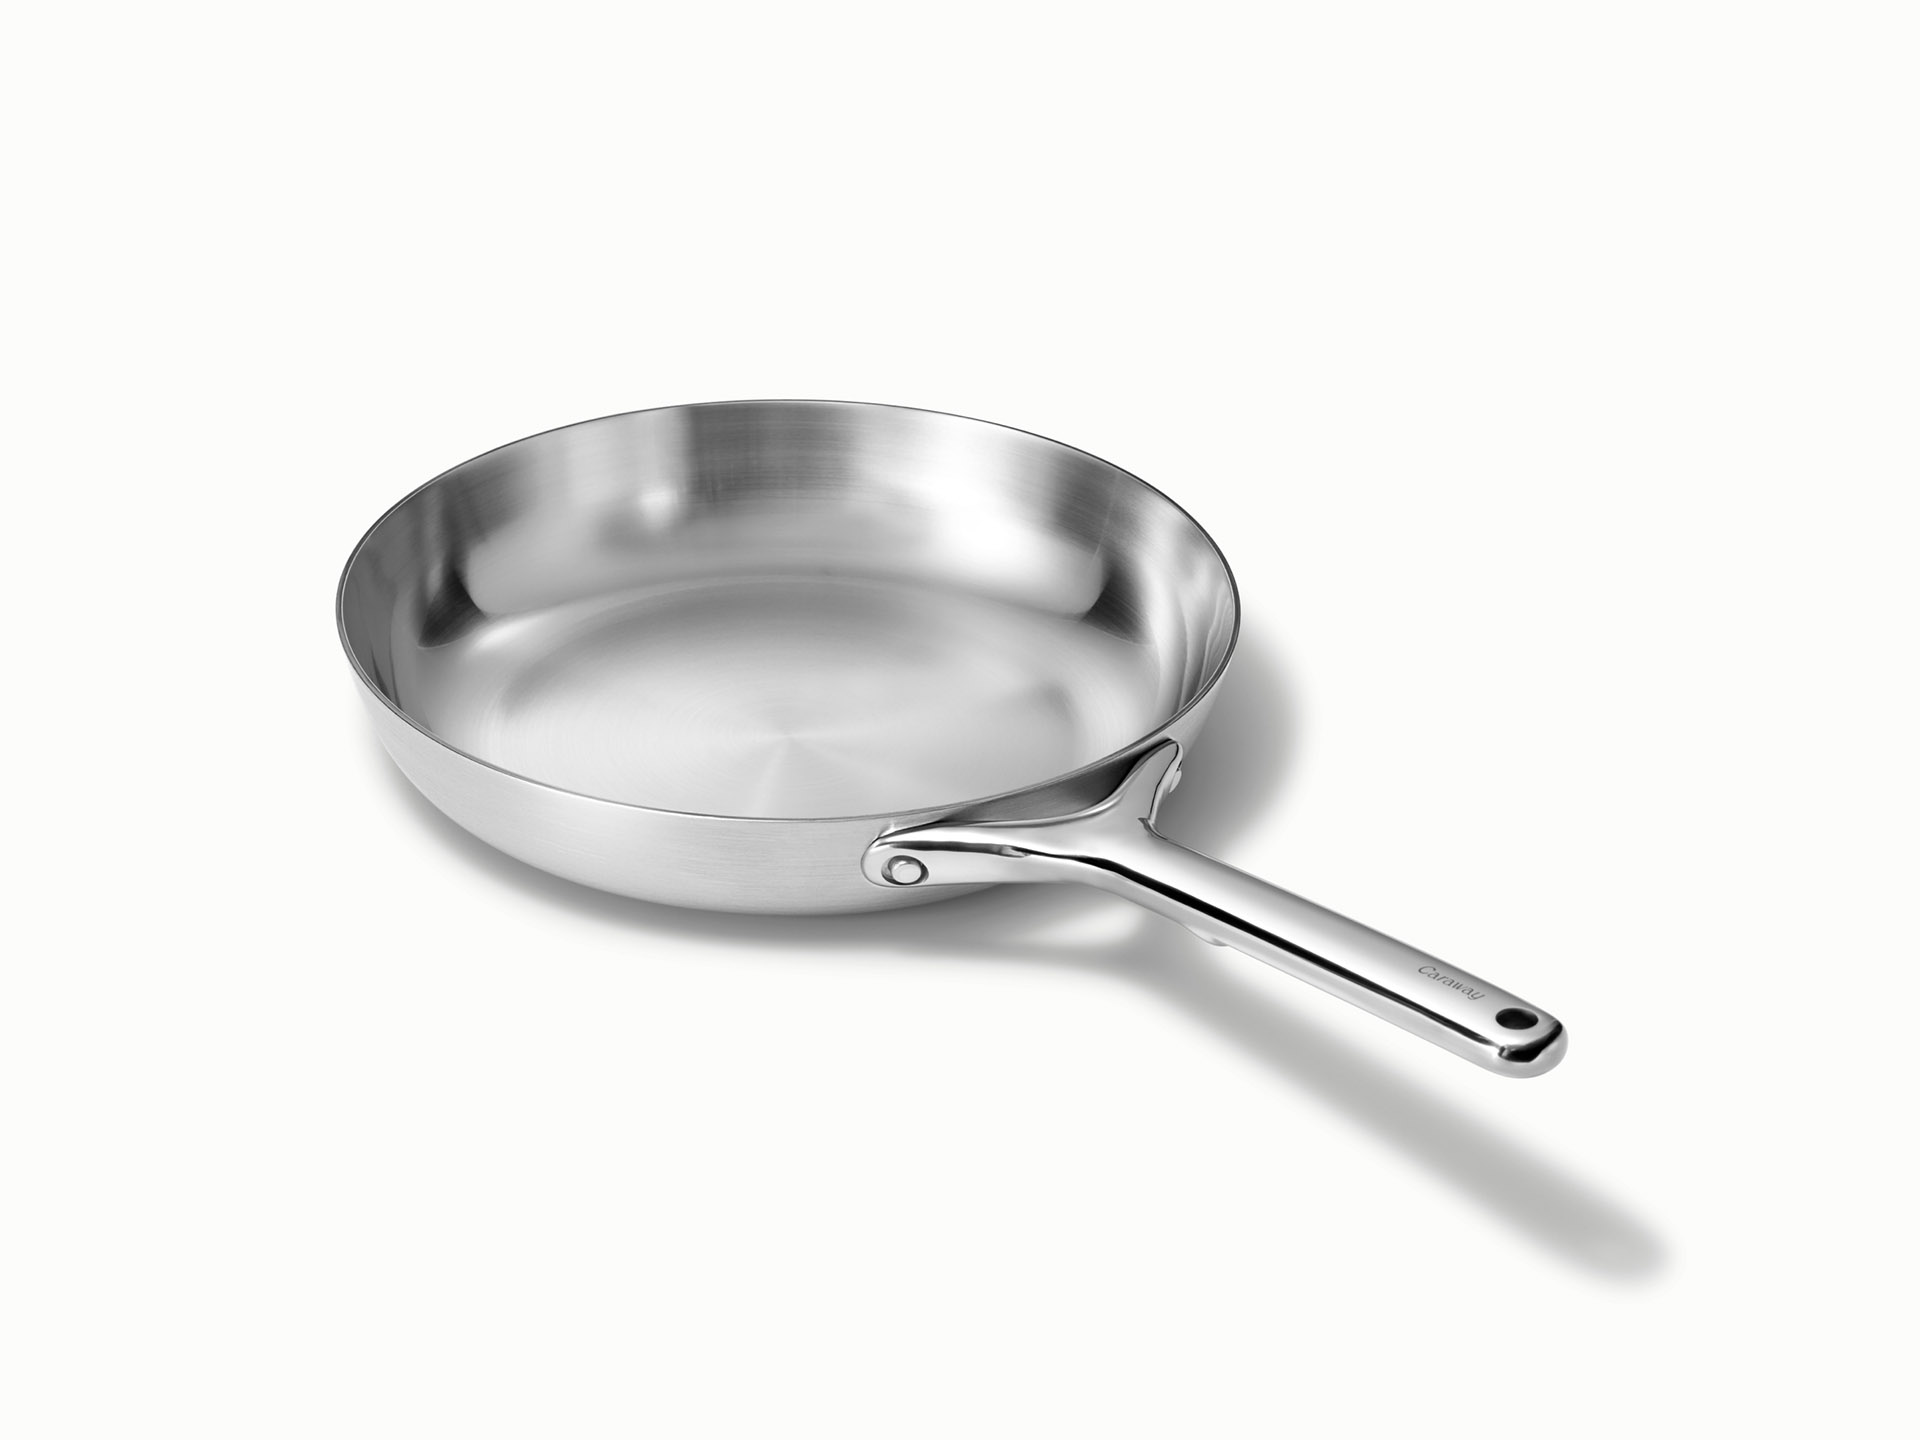 Caraway Stainless Steel Cookware Set